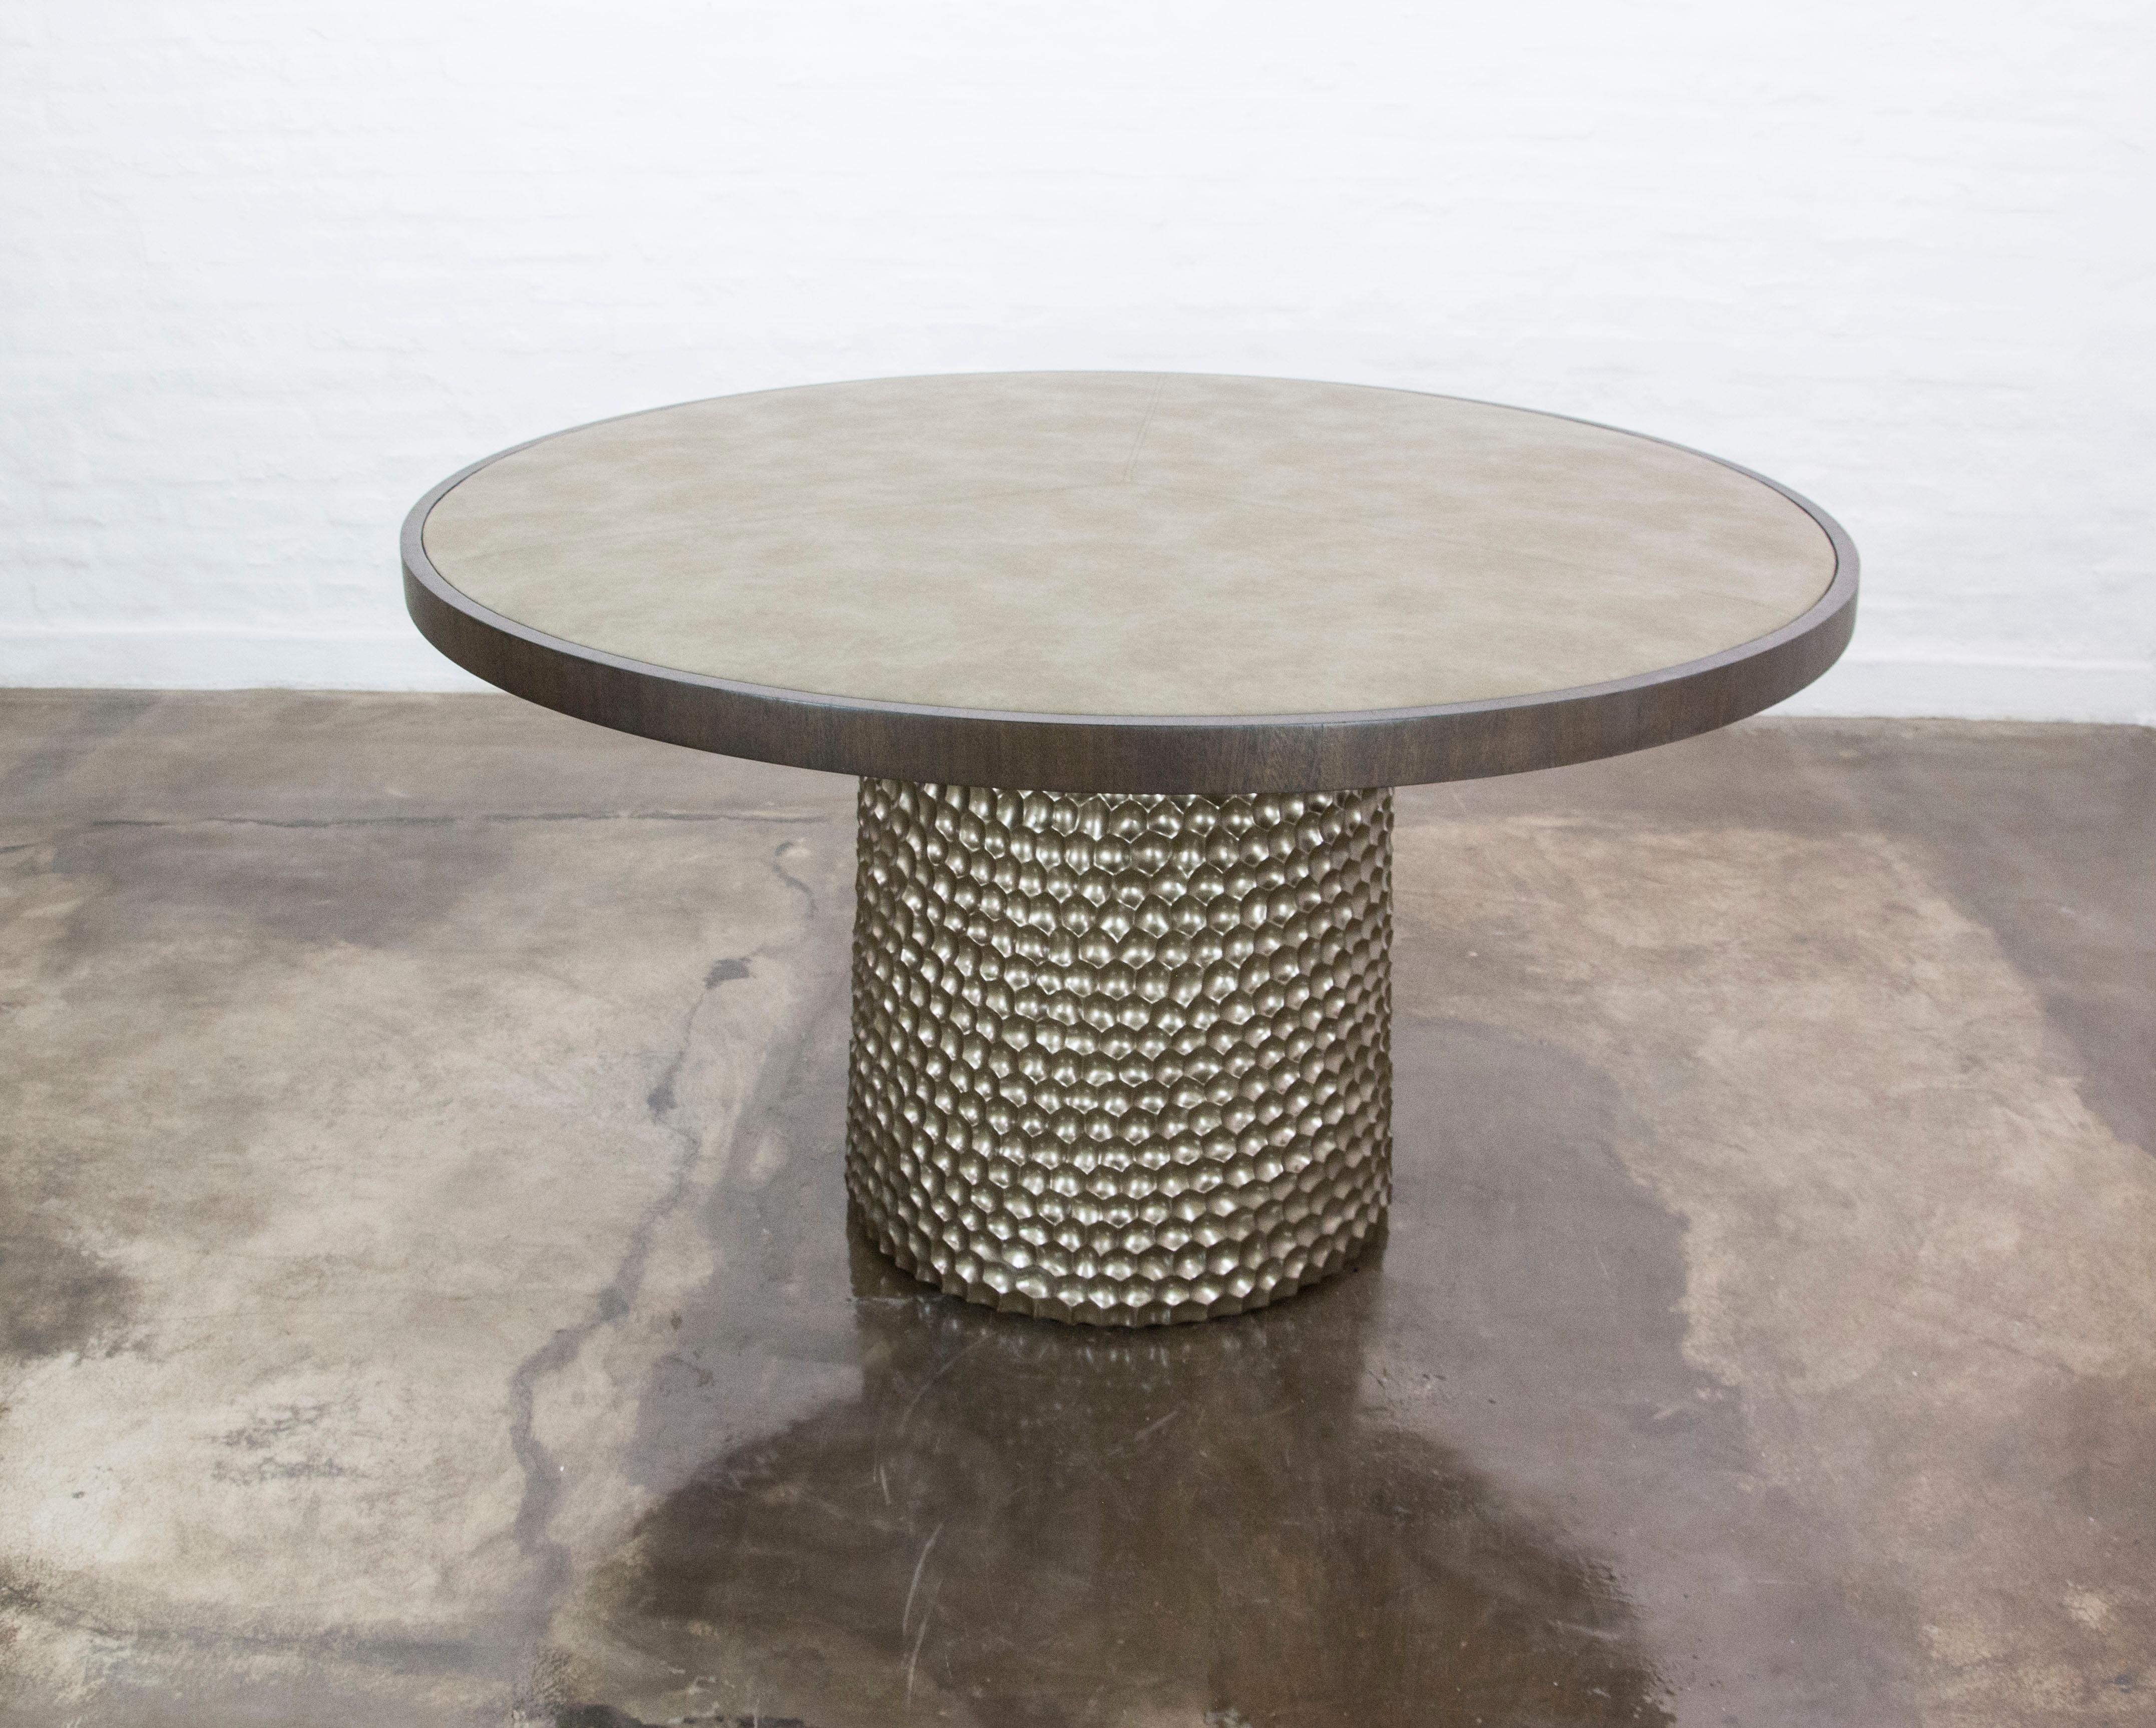 This Sculptural Round Carved Metallic Wood and Fabric Game Table from Costantini Design is hand carved and the top is upholstered in the fabric or leather of your choice.  Also suitable as a dining, serving, or center table.  

Measurements are 30